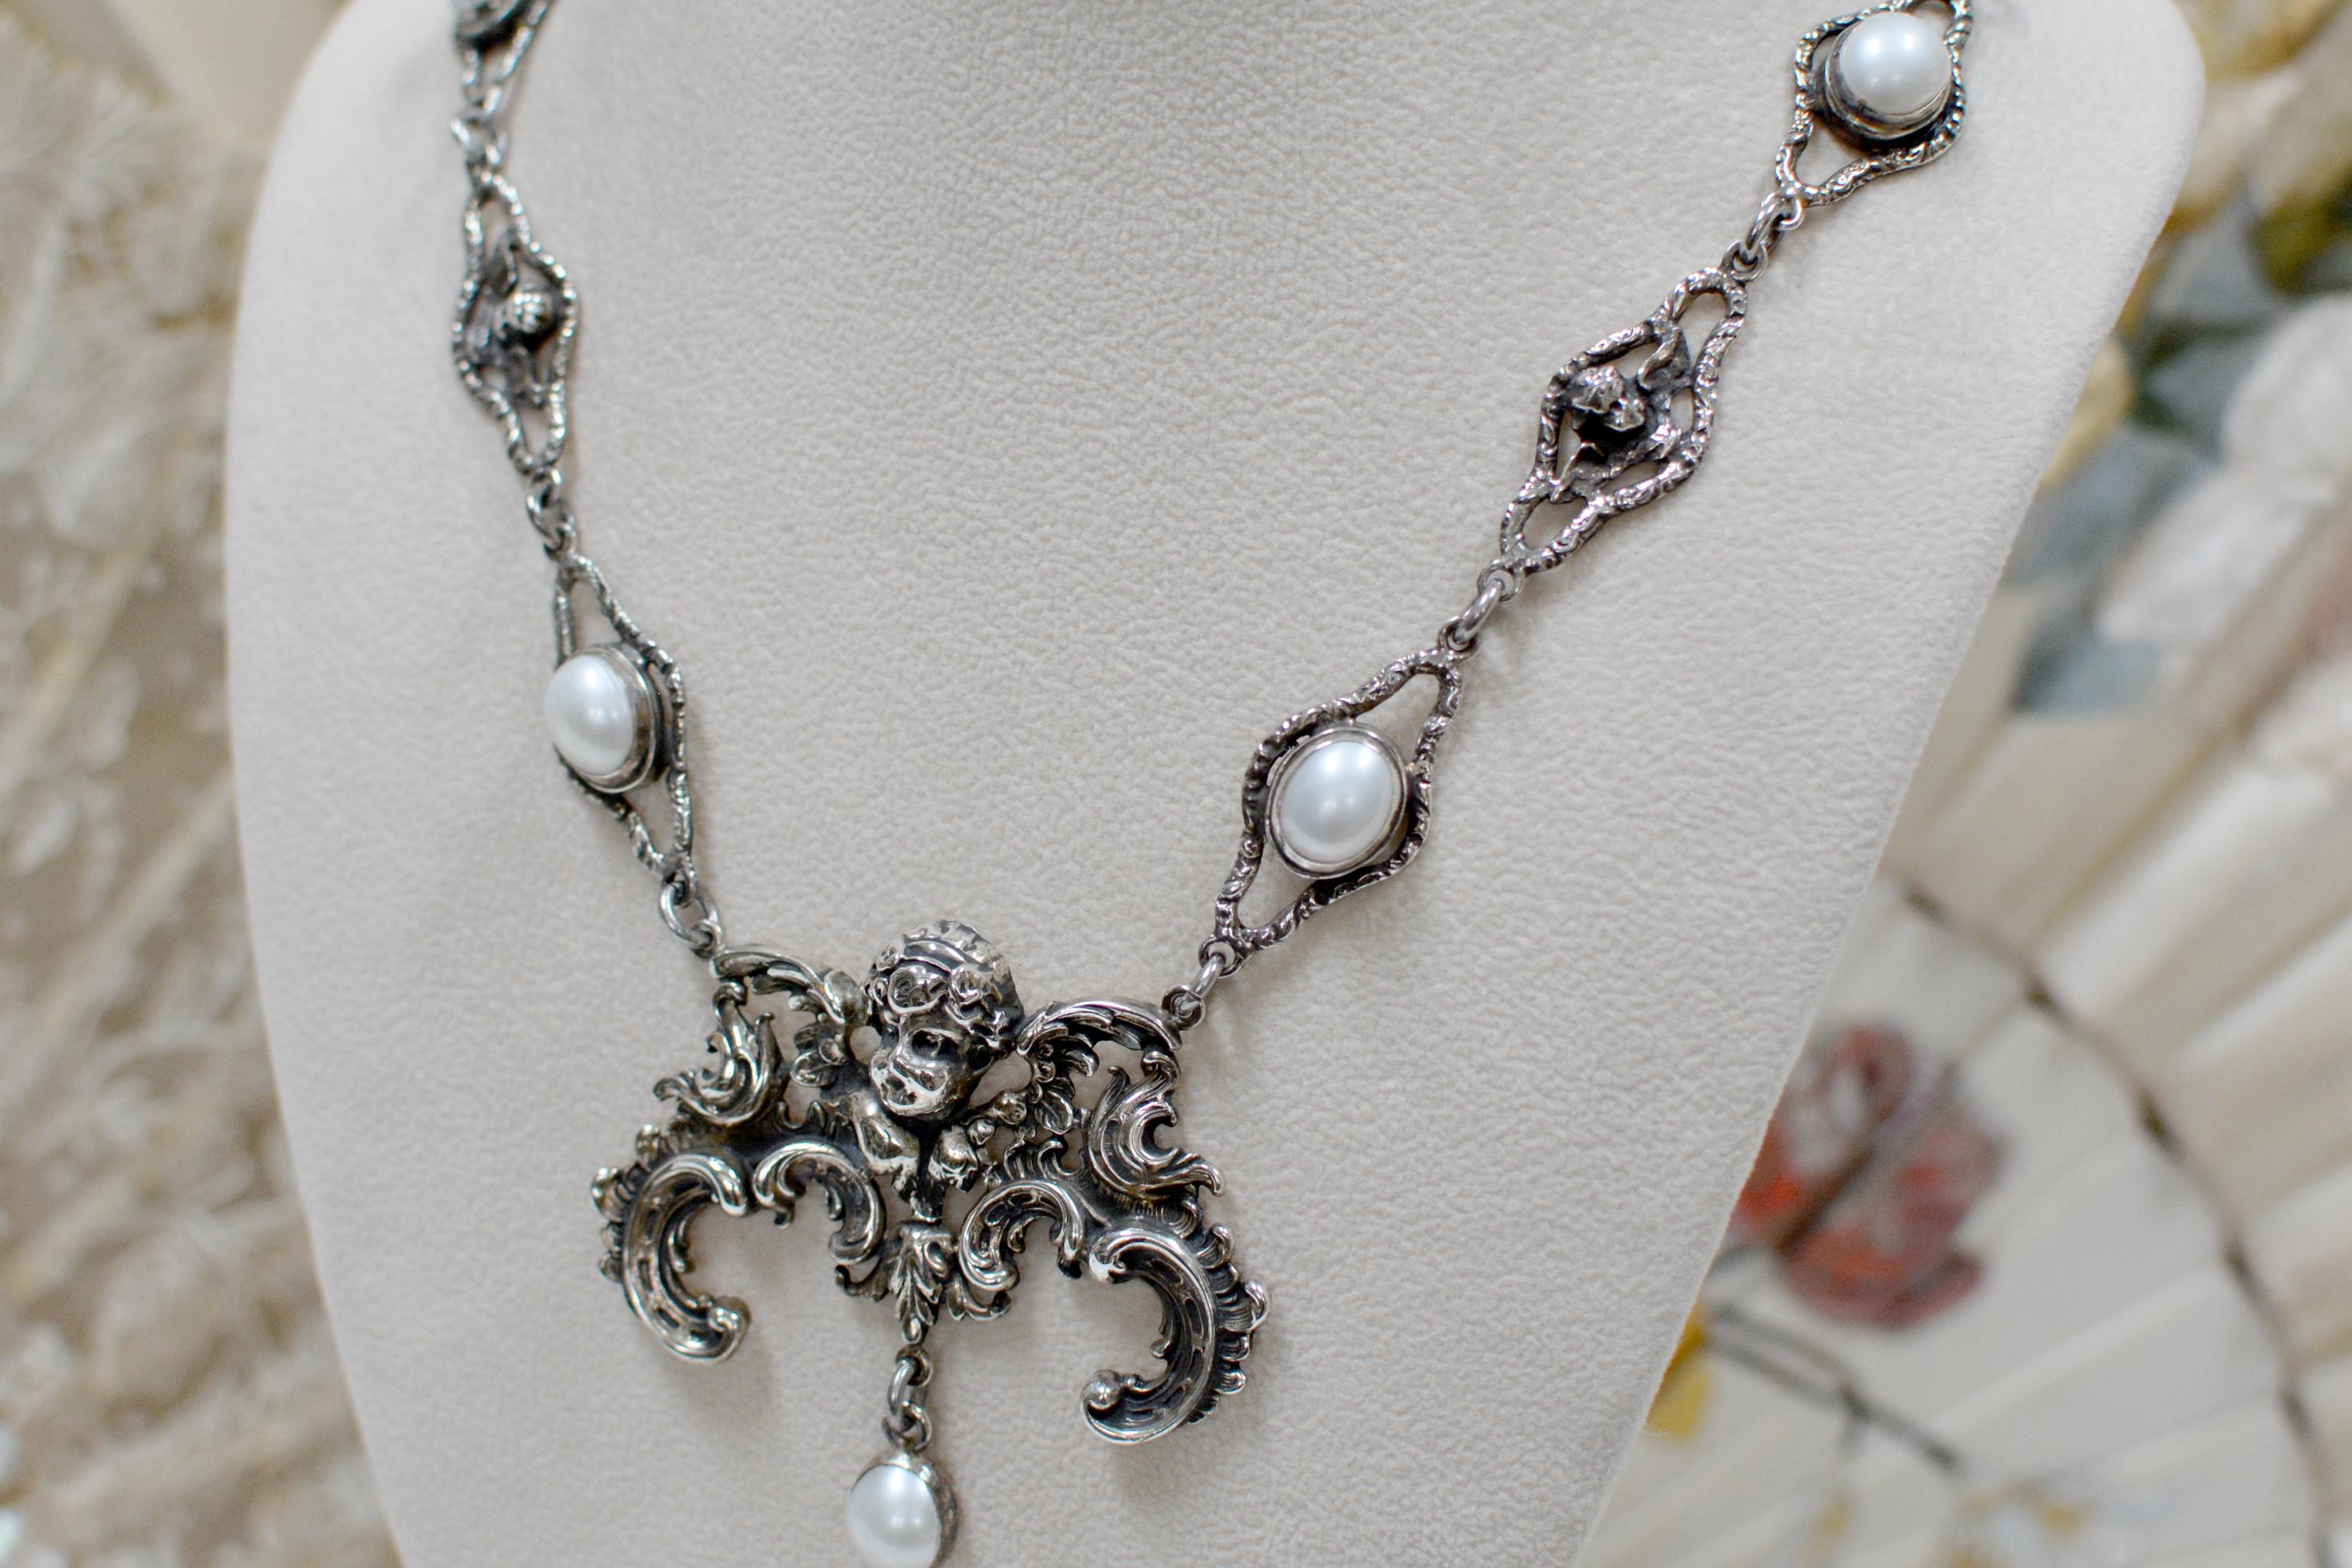 Women's or Men's Jill Garber Necklace with Baroque Angel and Freshwater Pearls